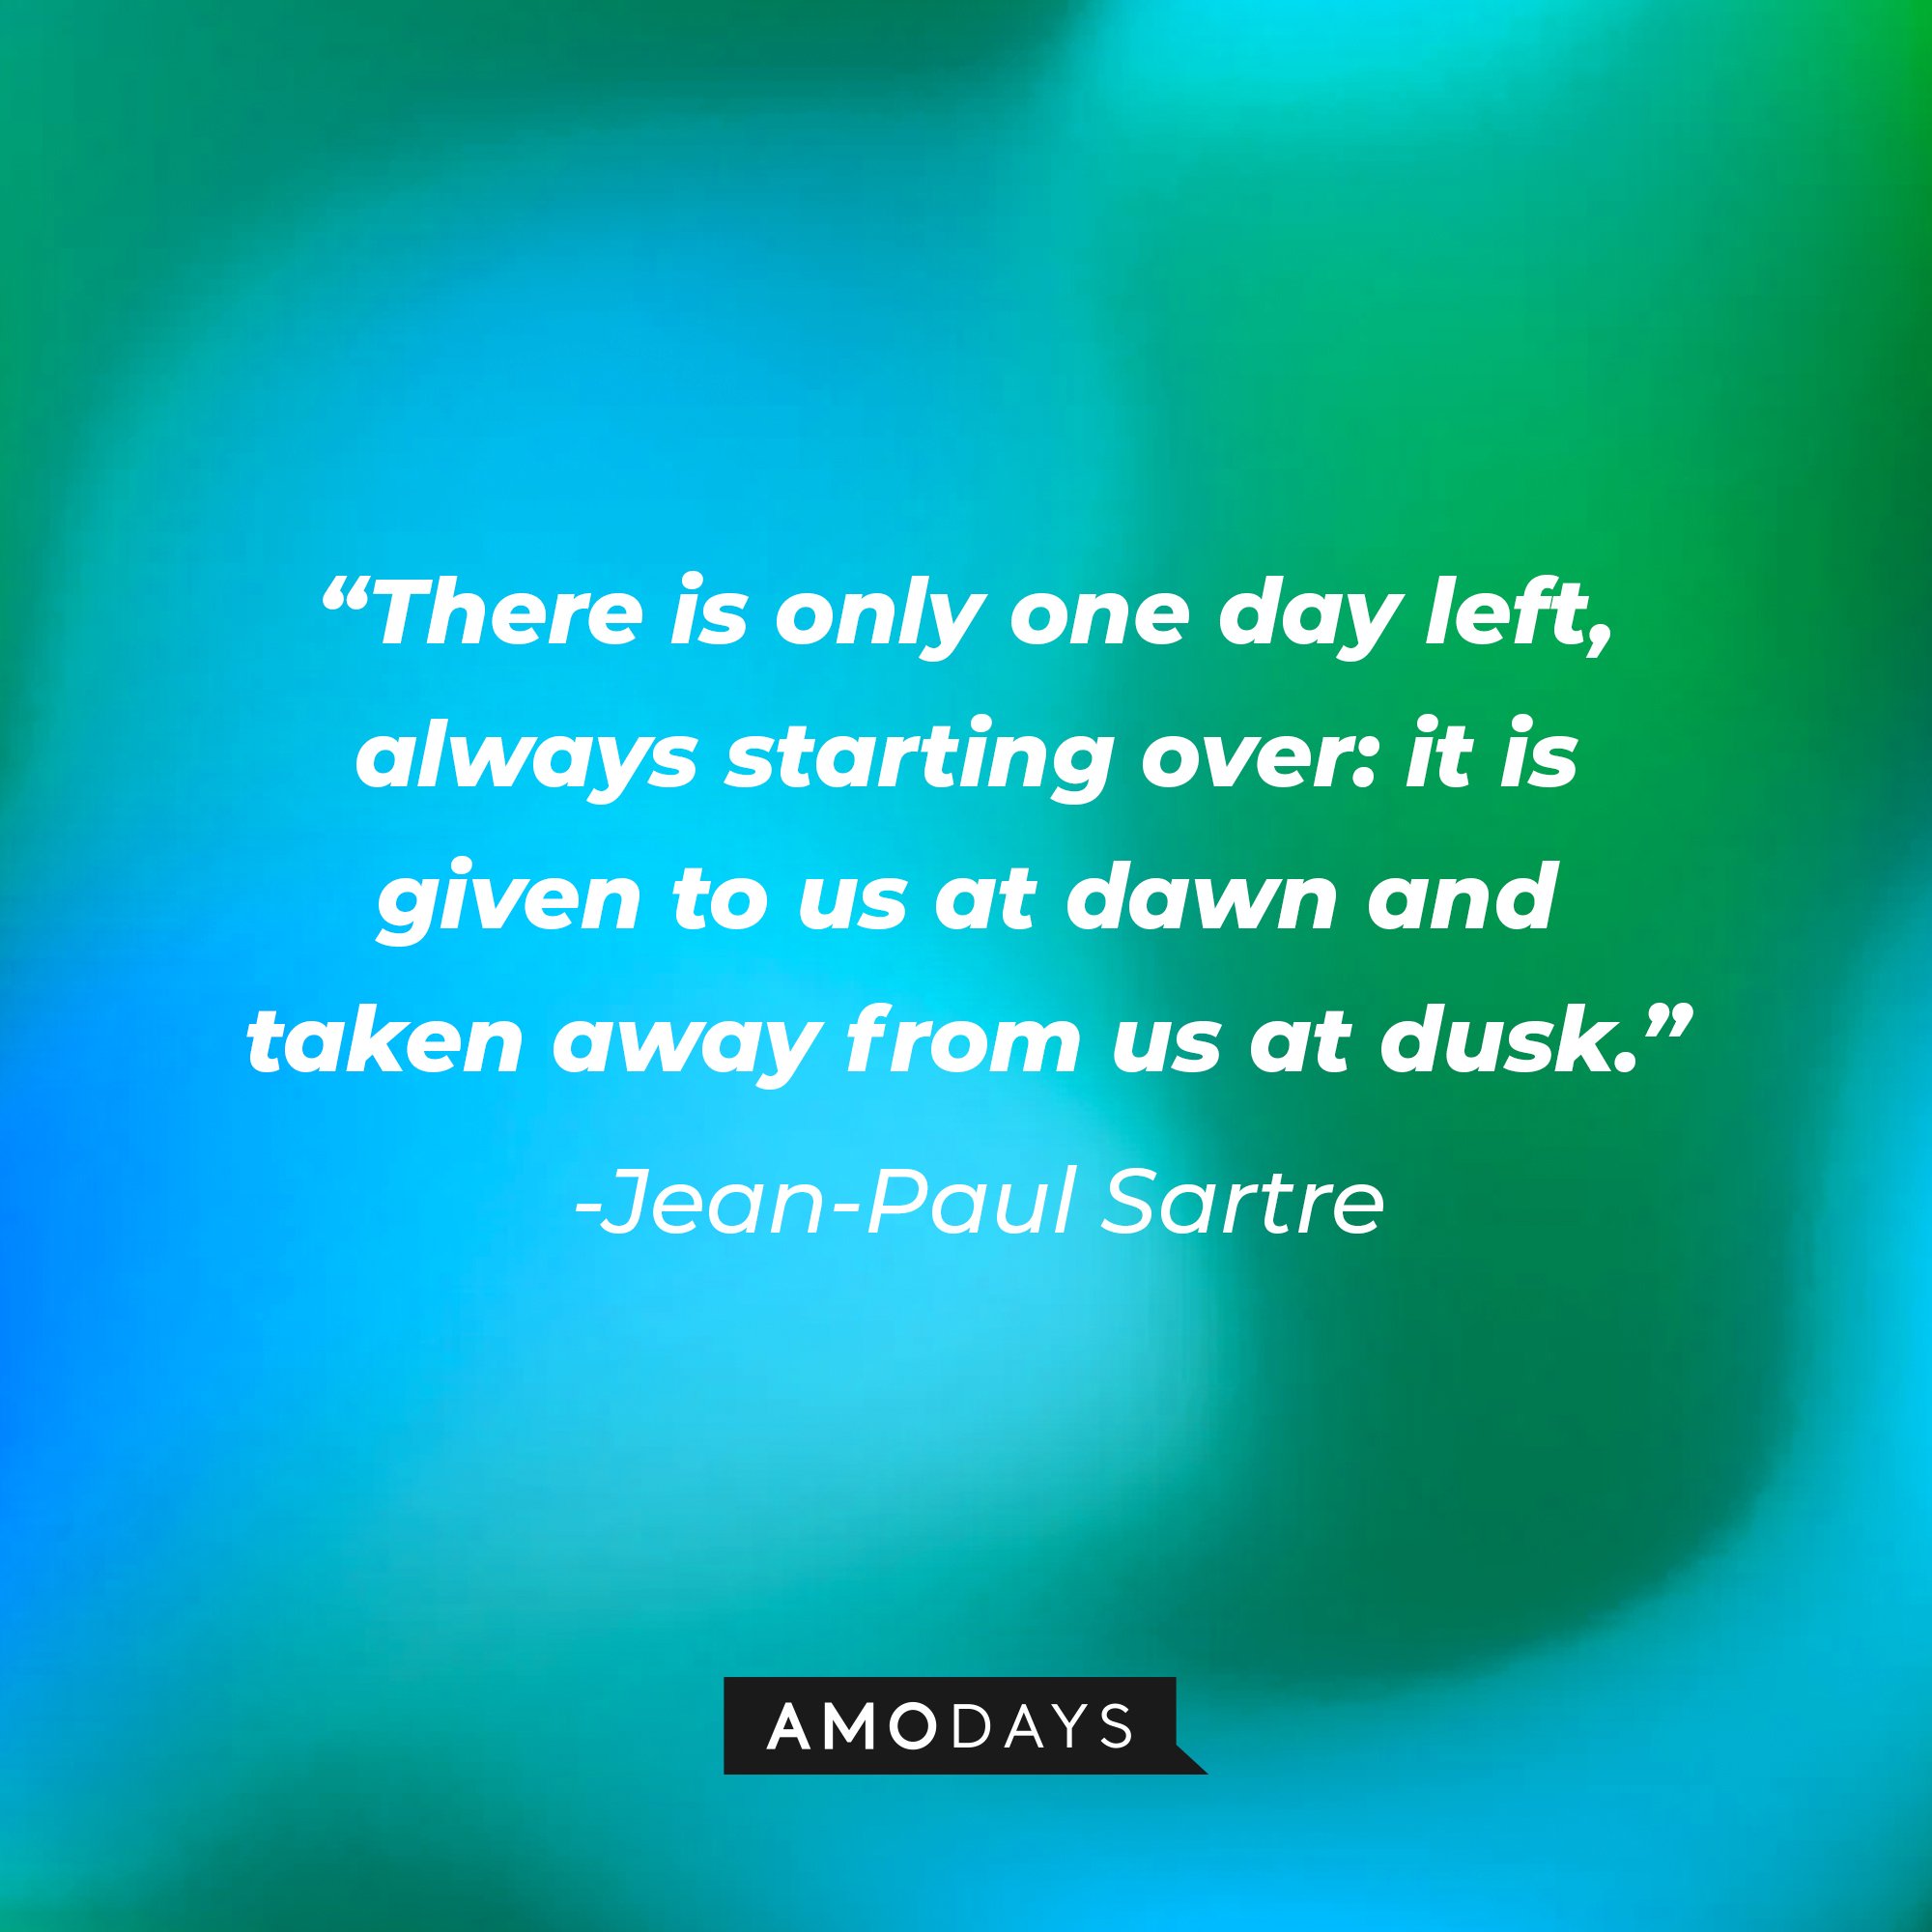 Jean-Paul Sartre's quote: "There is only one day left, always starting over: it is given to us at dawn and taken away from us at dusk." | Image: AmoDays